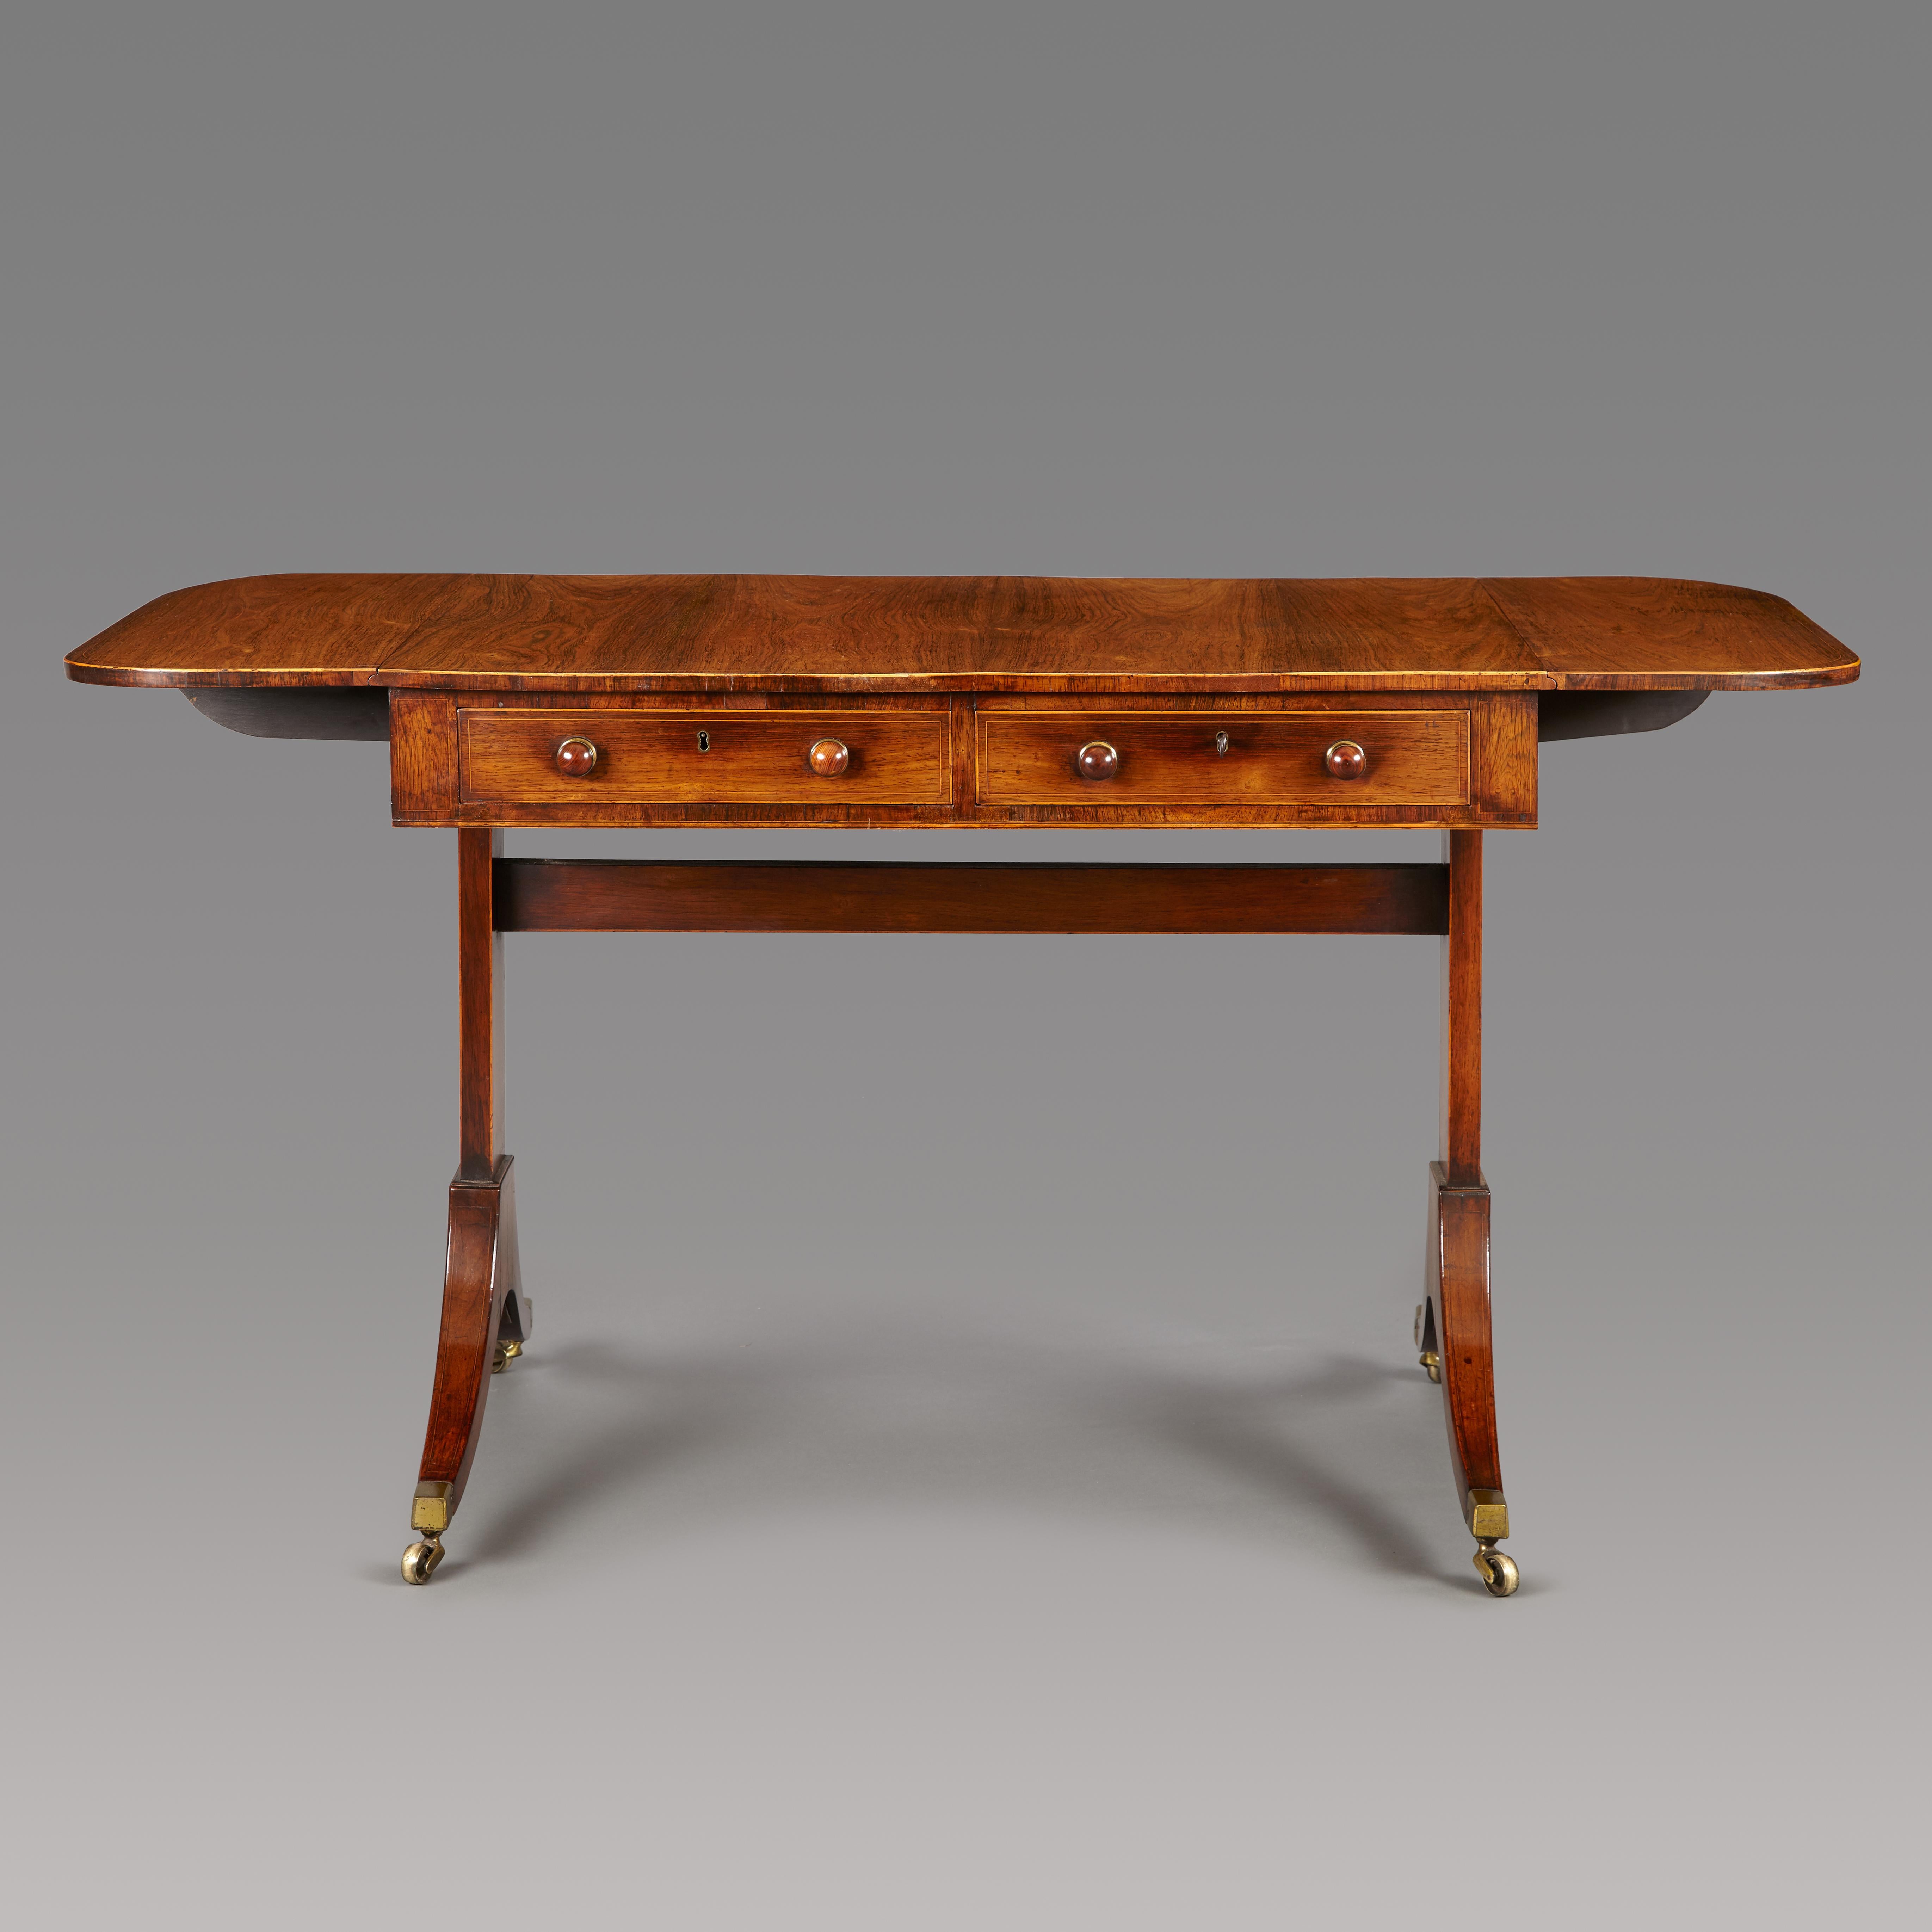 An elegant George III period century rosewood sofa table of good proportions. The well figured veneered top having a Boxwood line inlay to the edge, the two drawers and two faux drawers also inlaid to match. The drawers fitted with the original